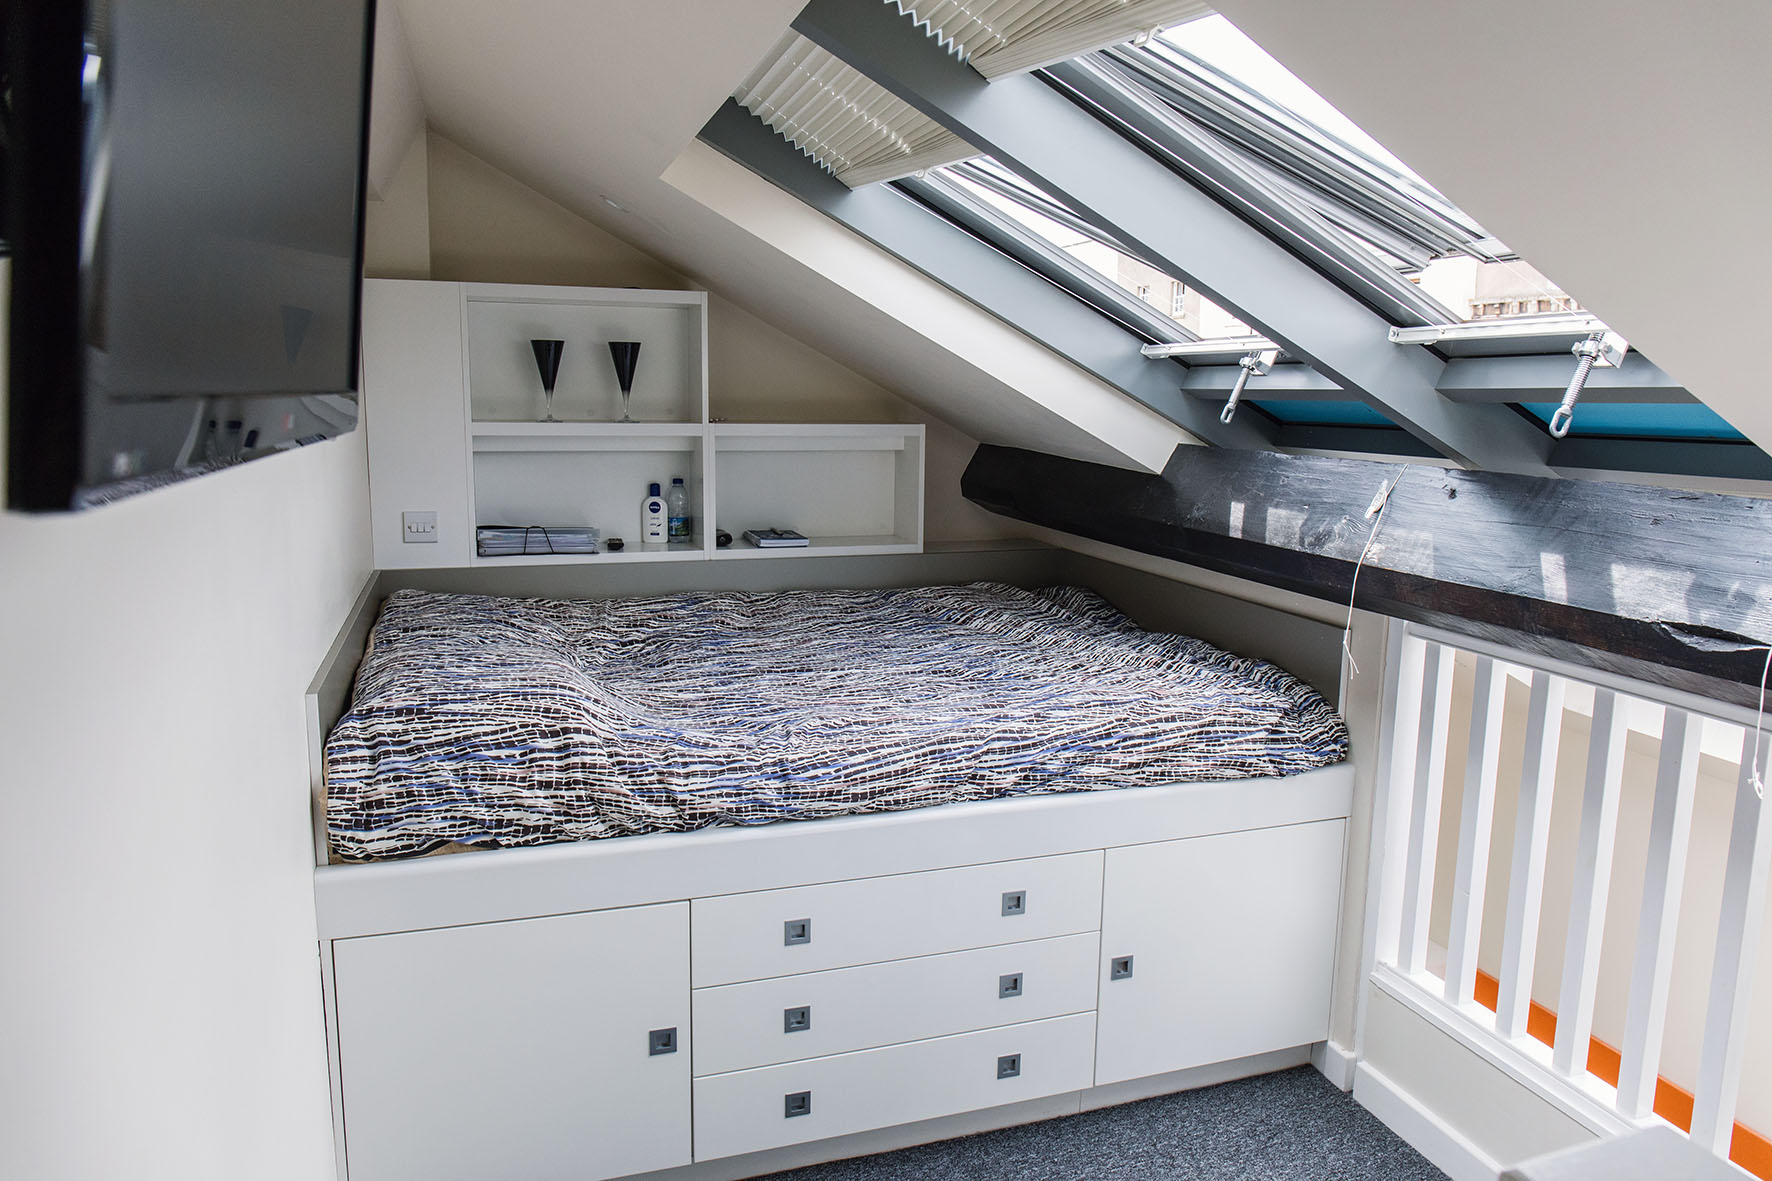 Premium Range 1 One Bedroom Flat at Cathedral Park in Bristol, Unite Students accommodation